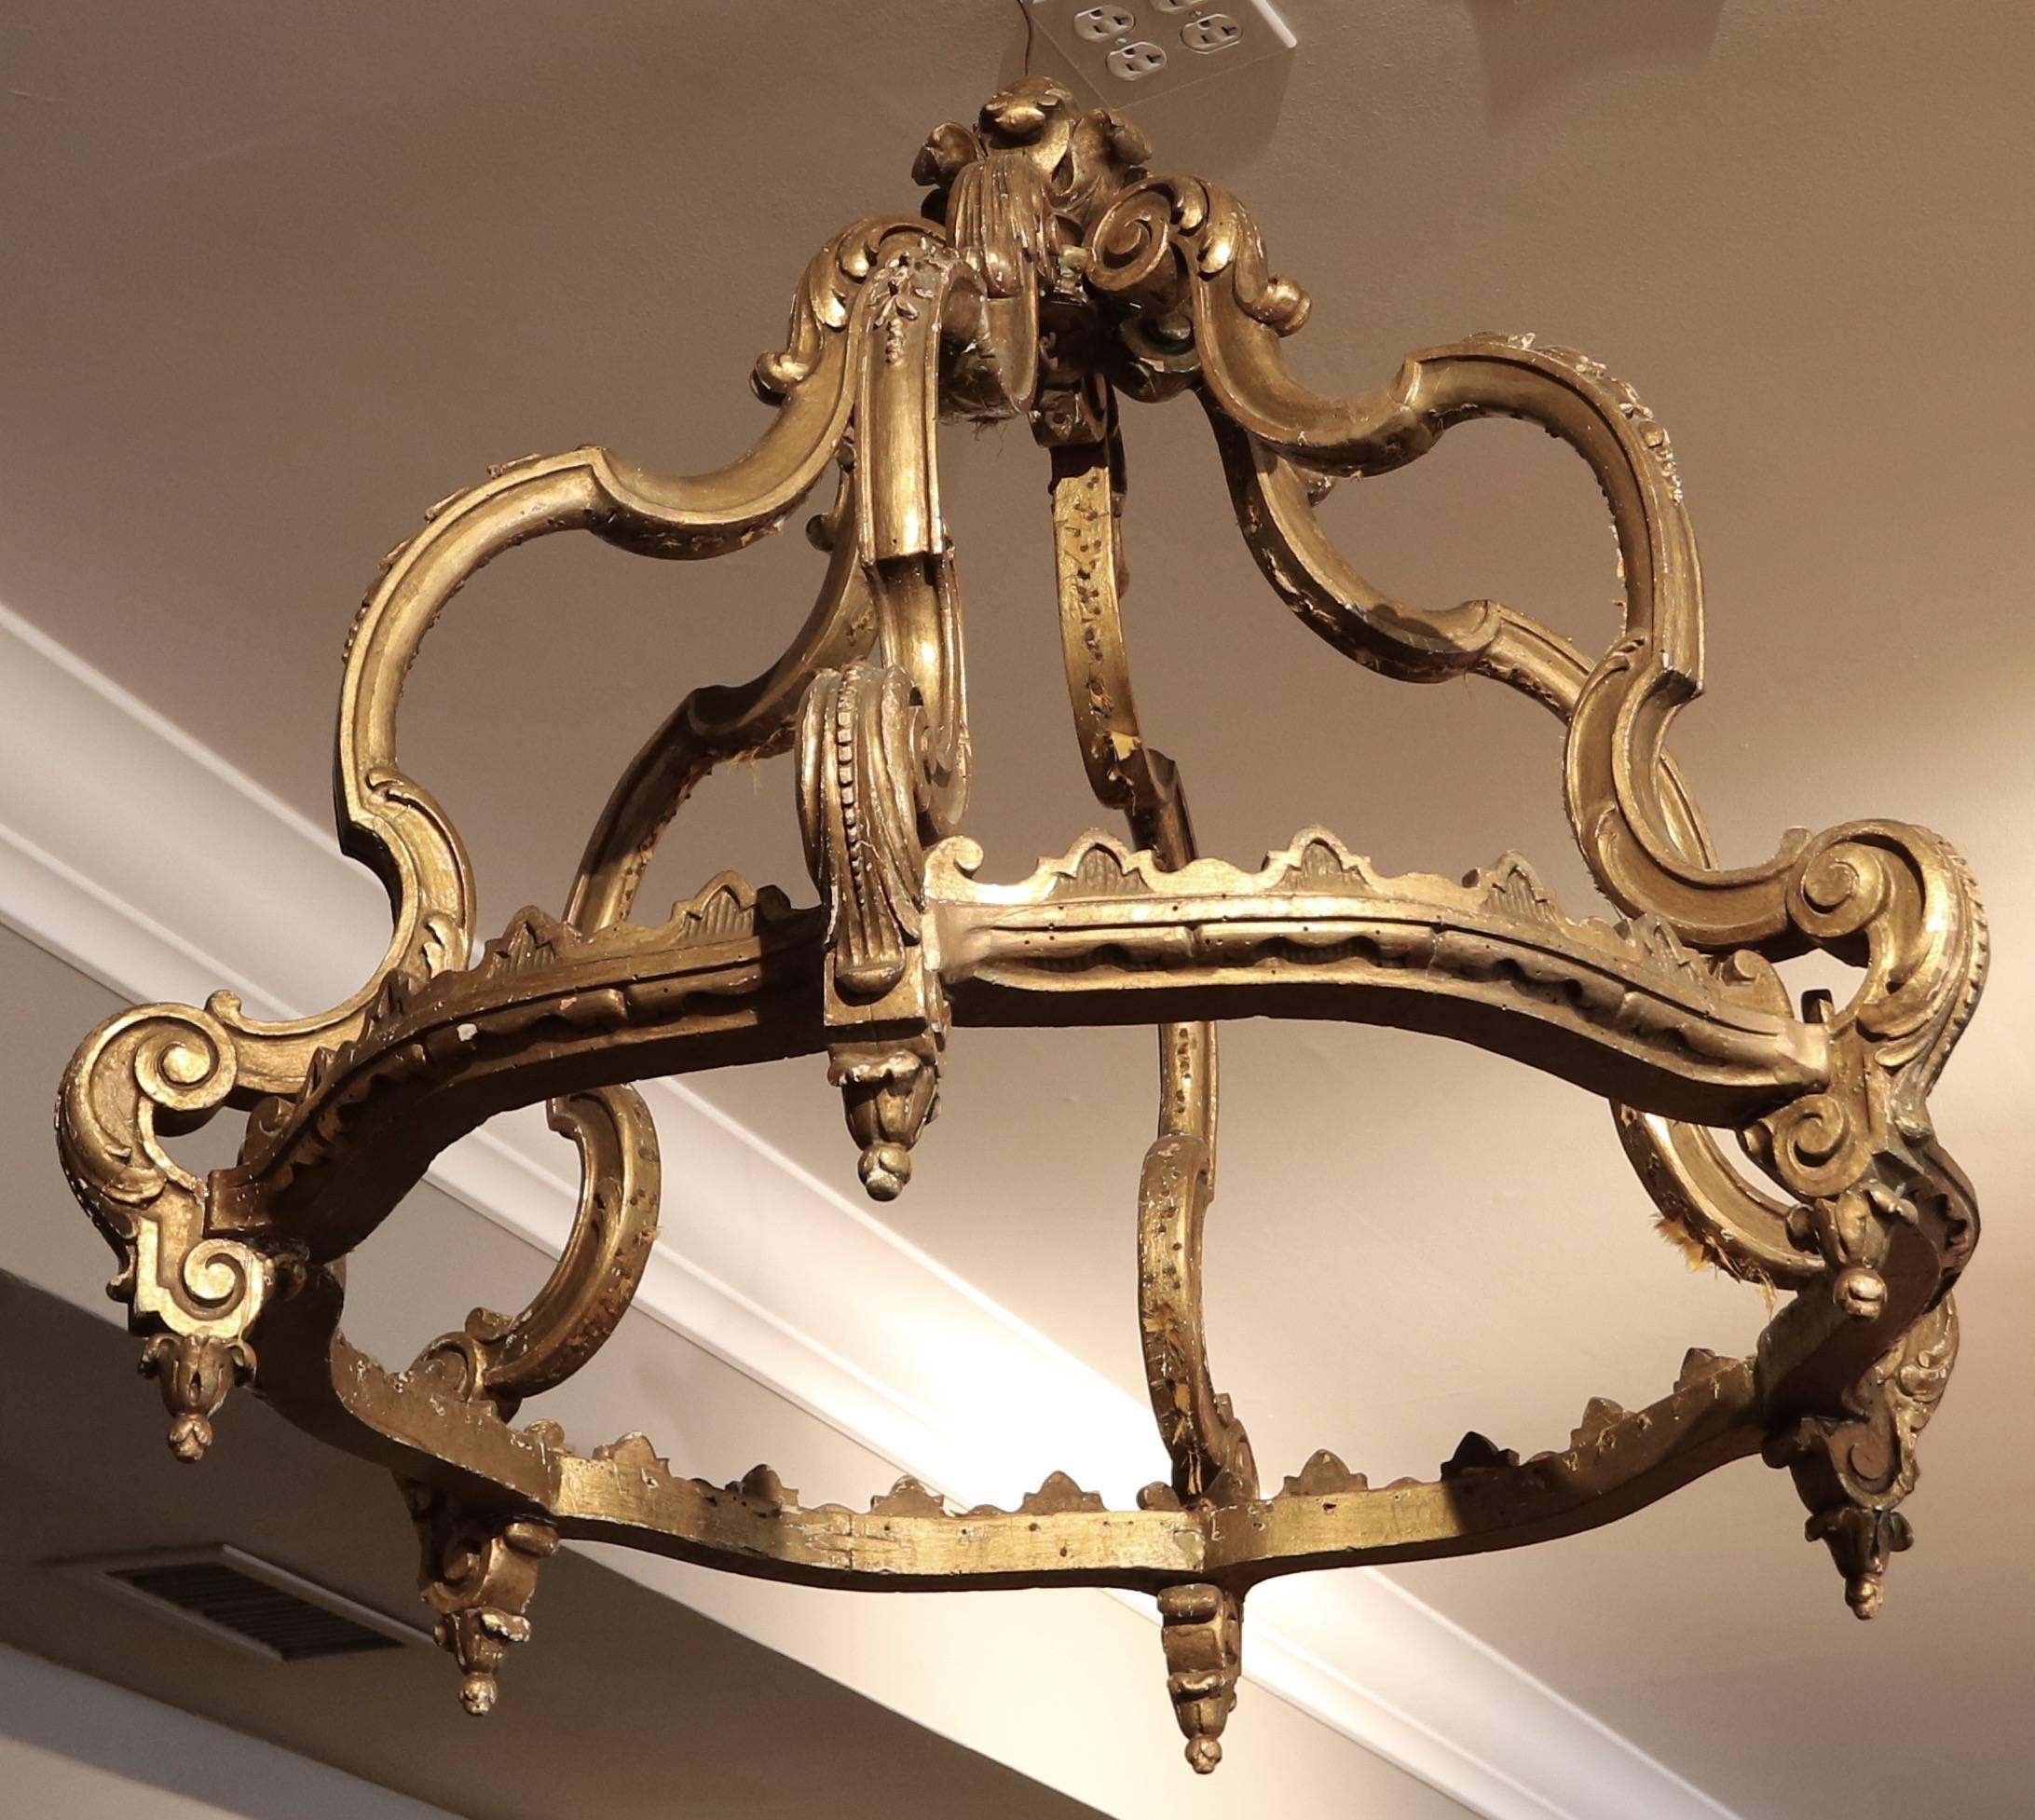 19th century Italian carved gilded wood bed corona or crown.